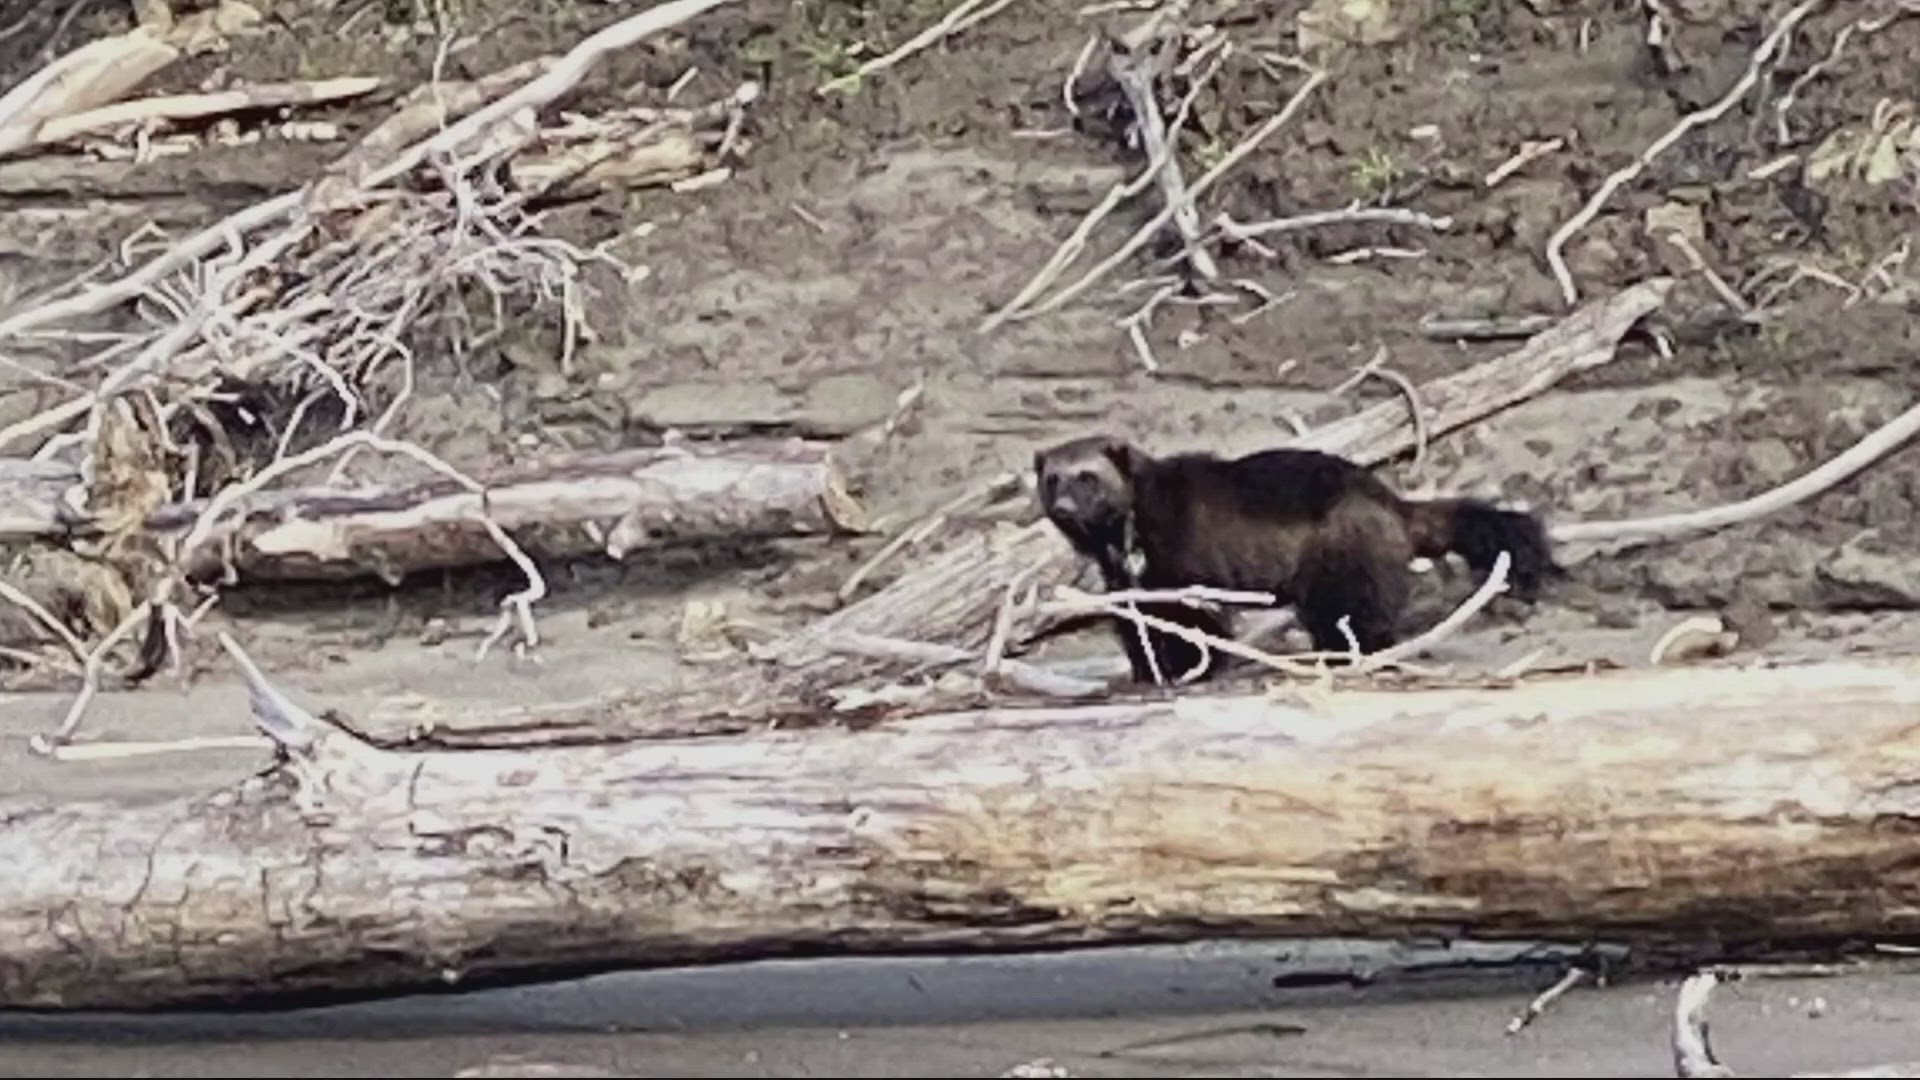 It’s the first sighting of a wolverine outside of the Wallowa Mountains in more than 30 years. They’re more common in Canada and Alaska.